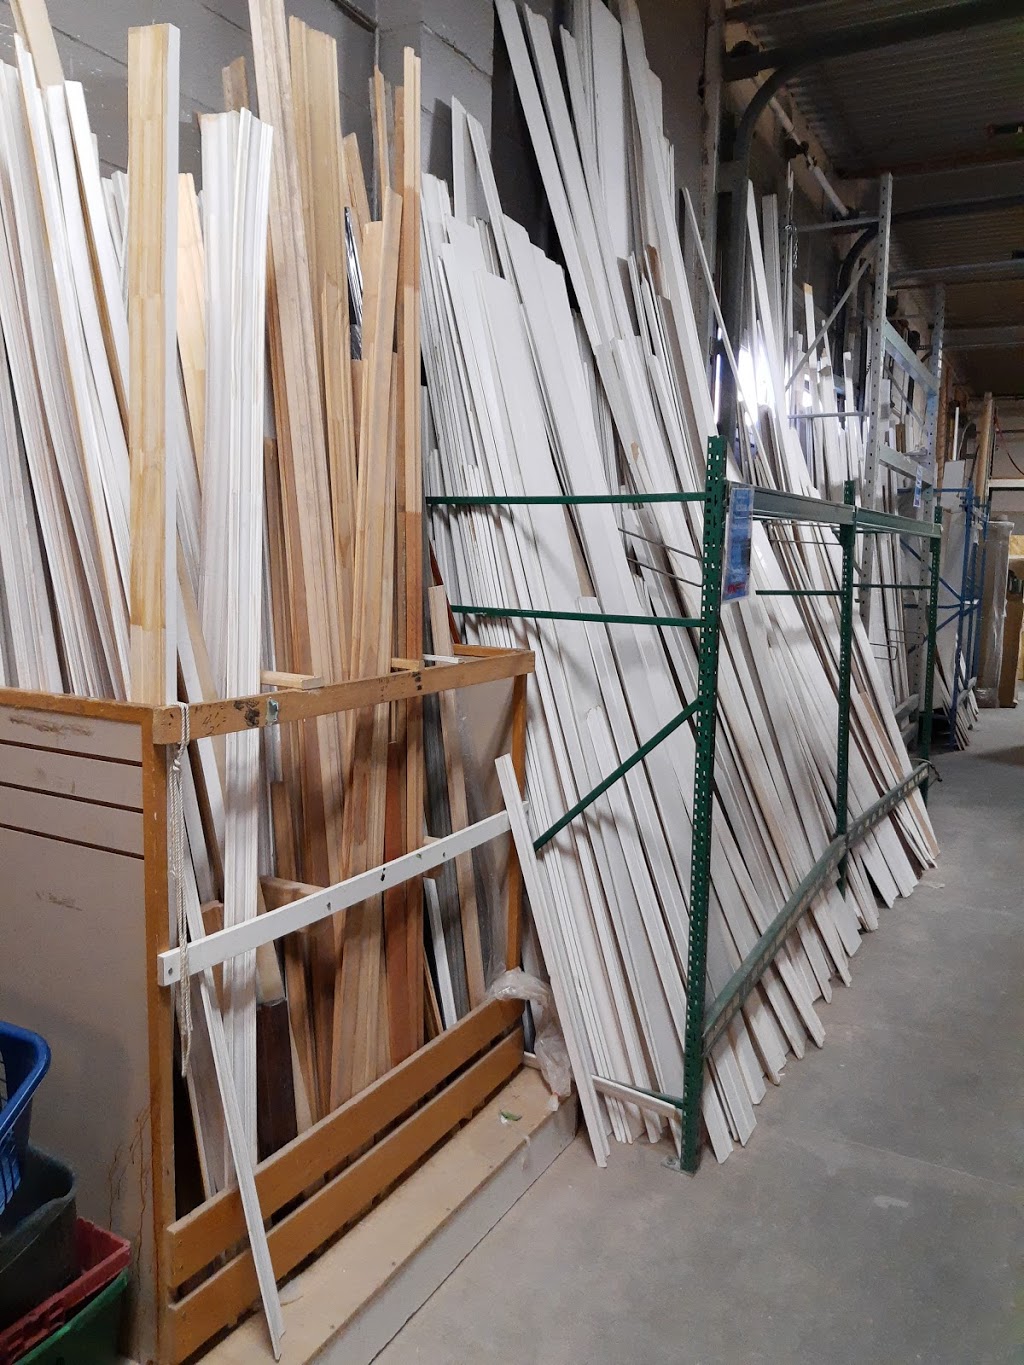 Habitat For Humanity ReStore | hardware store | 128 Brock St, Barrie, ON L4N 2M2, Canada | 8778352001 OR +1 877-835-2001